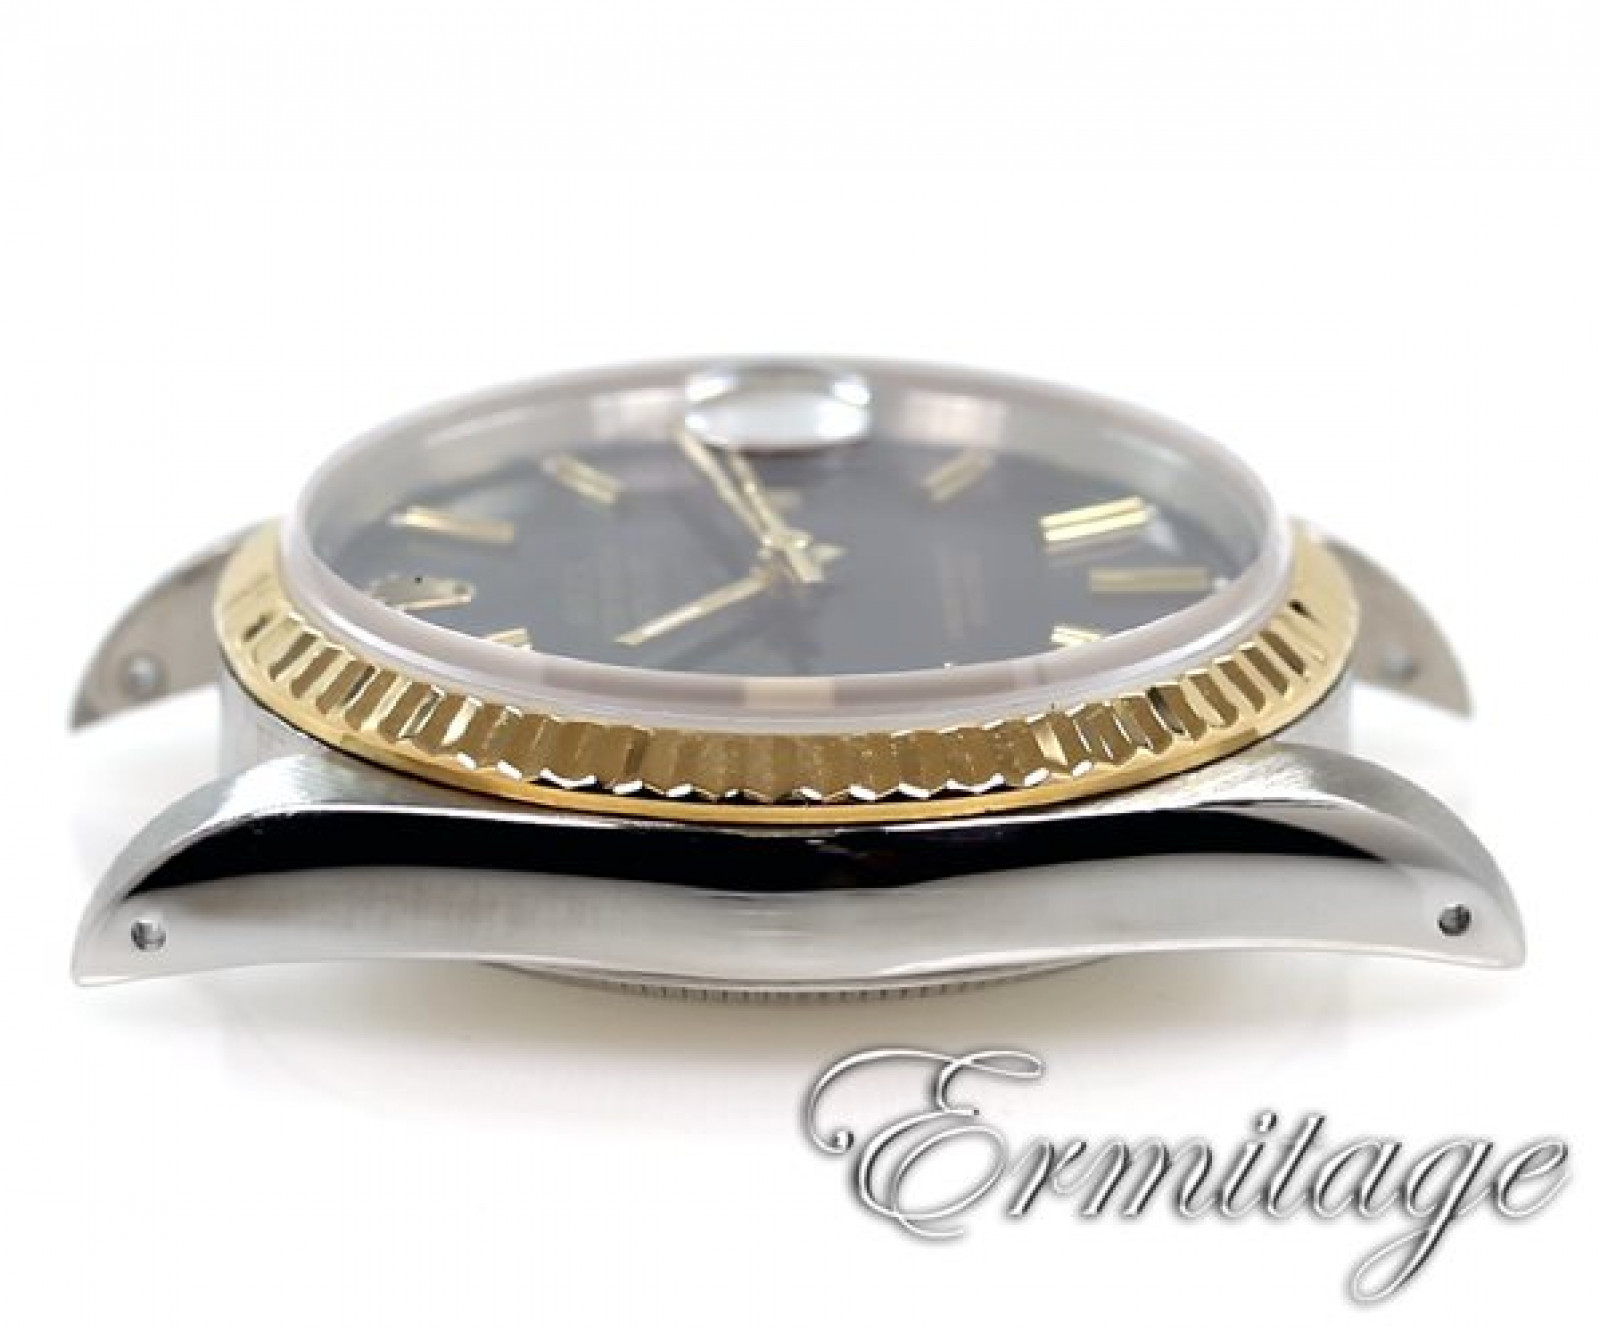 Pre-Owned Gold & Steel Rolex Datejust 16233